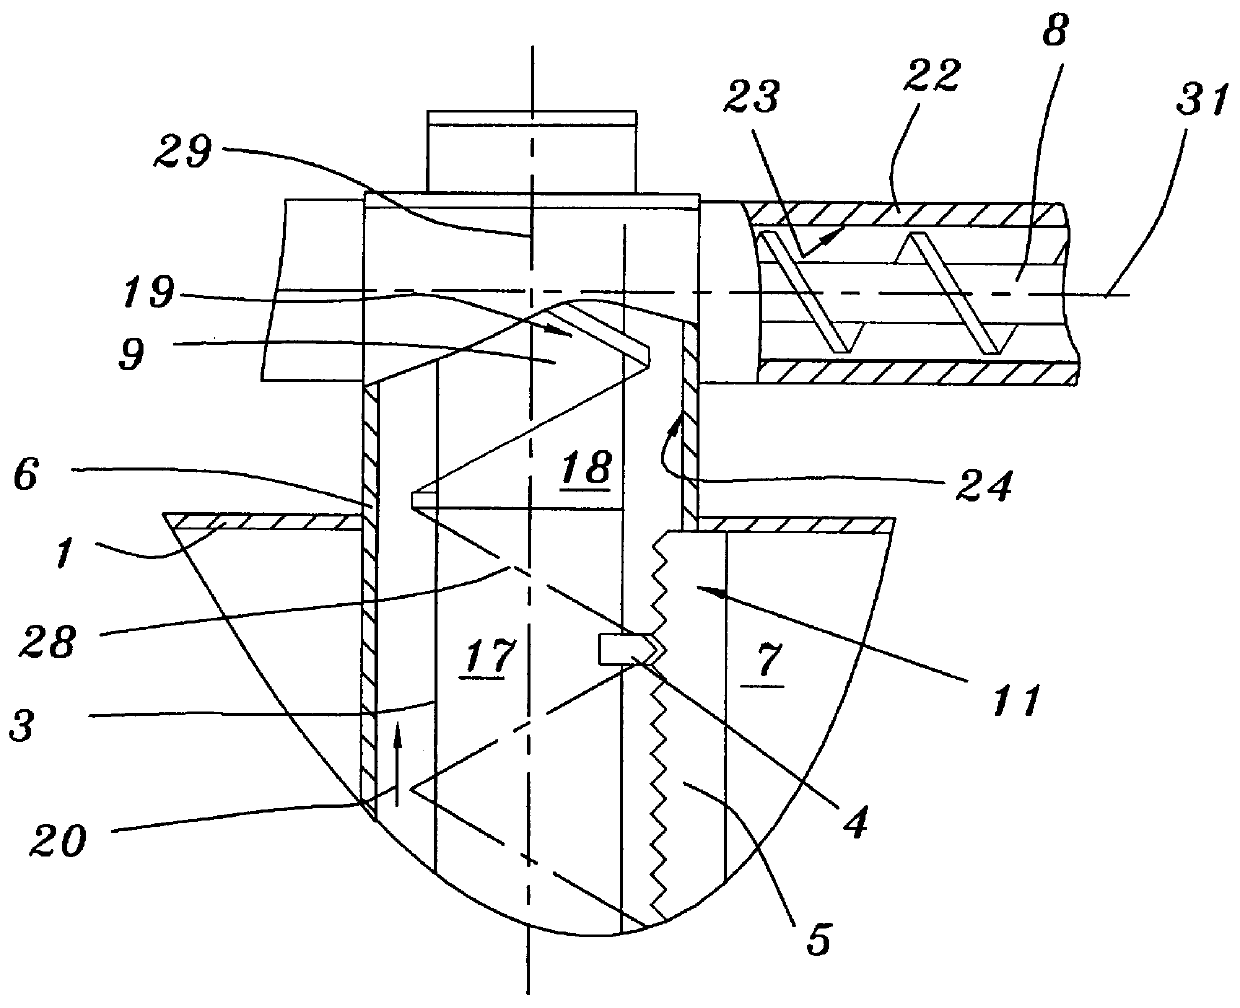 Processing device for crushing, conveying and plastifying thermoplastic synthetic material